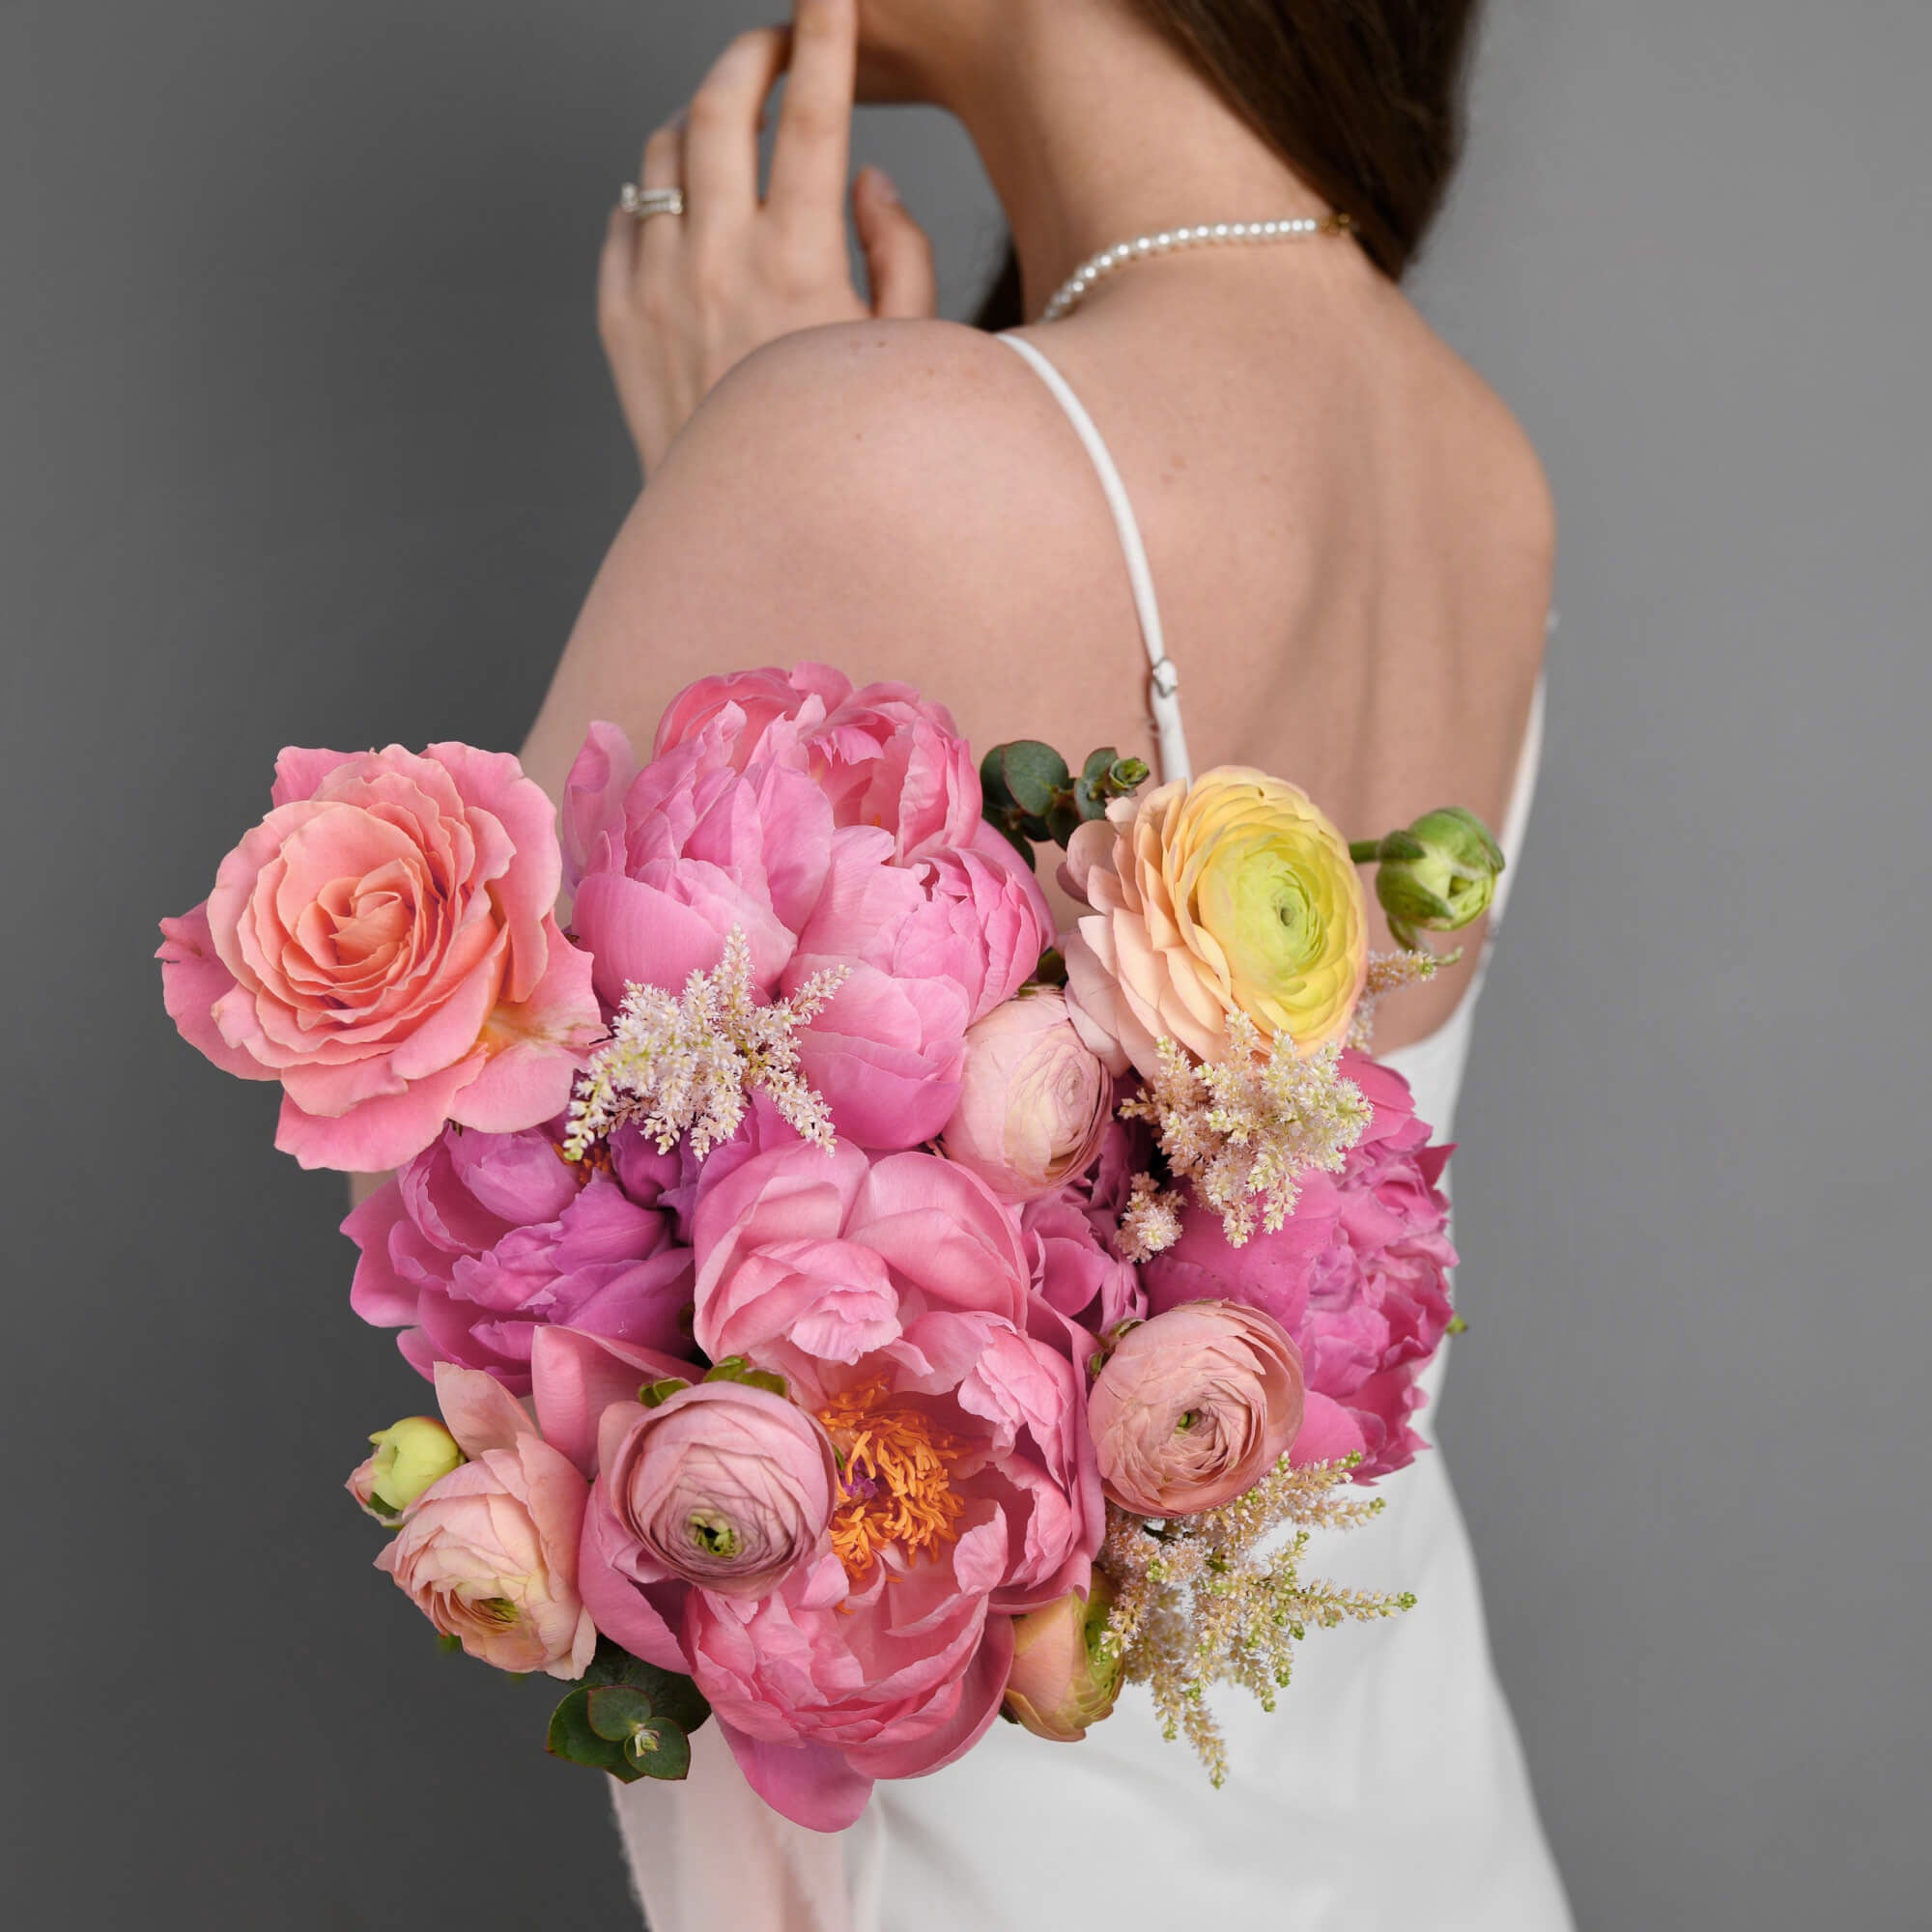 Bridal bouquet with peonies and roses